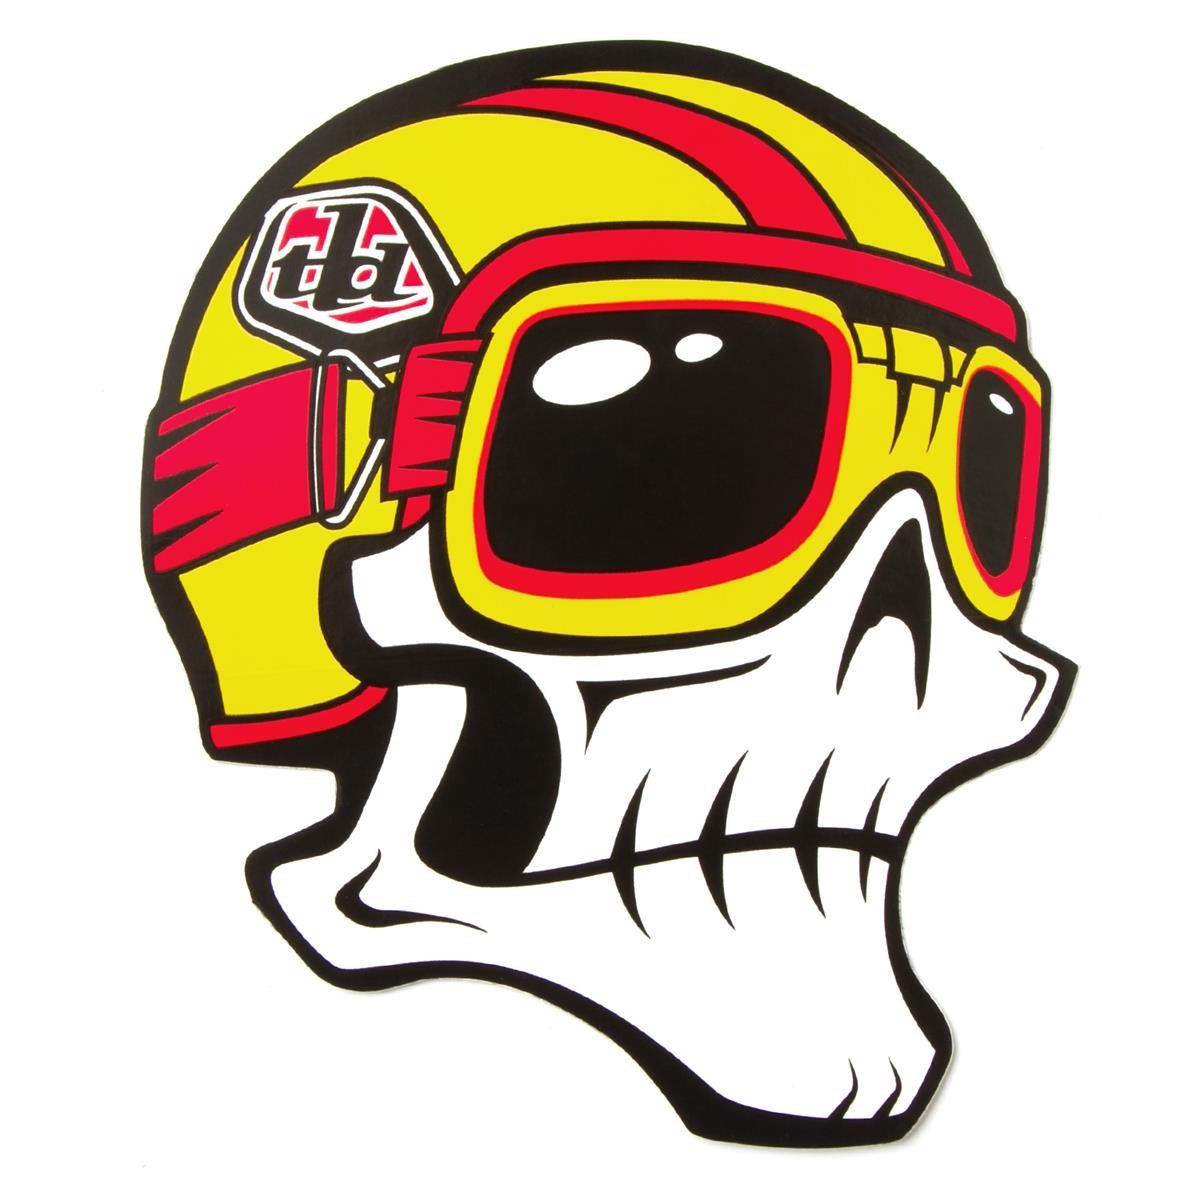 Troy Lee Designs Sticker Skully Yellow/Red - 5 inches